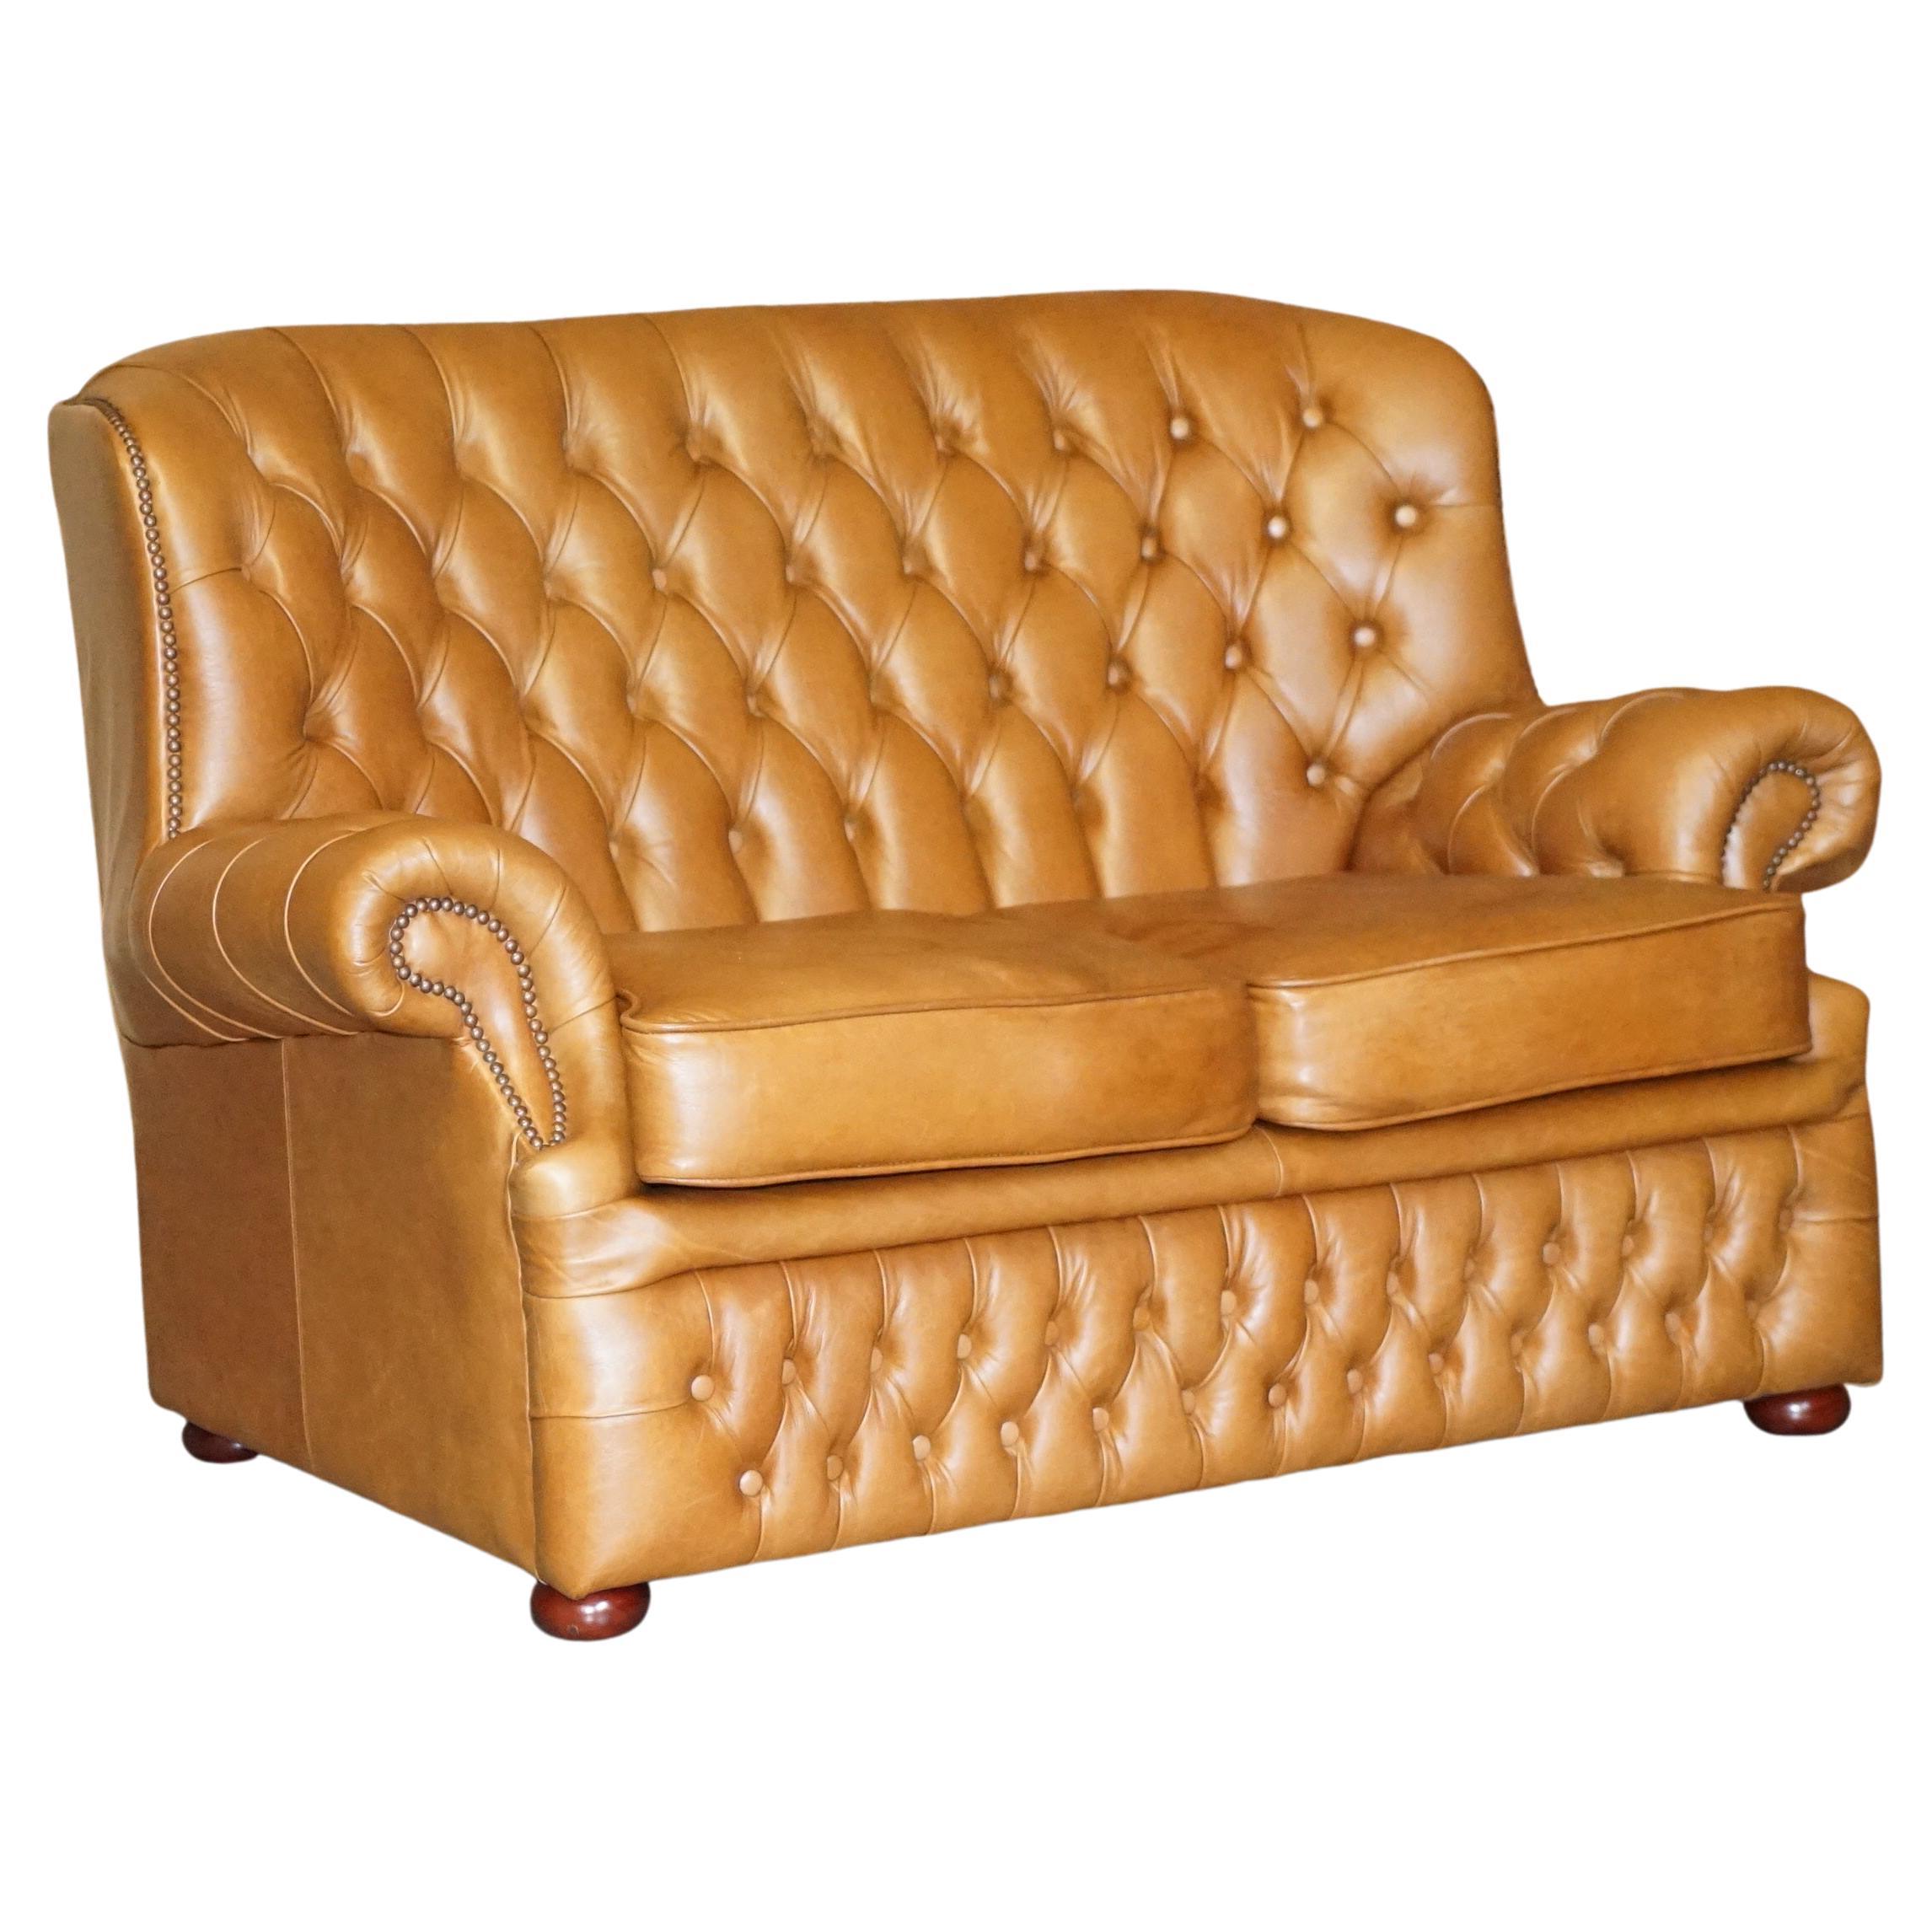 Small Wide Chesterfield Tan Brown Leather Tufted Sofa with High Back